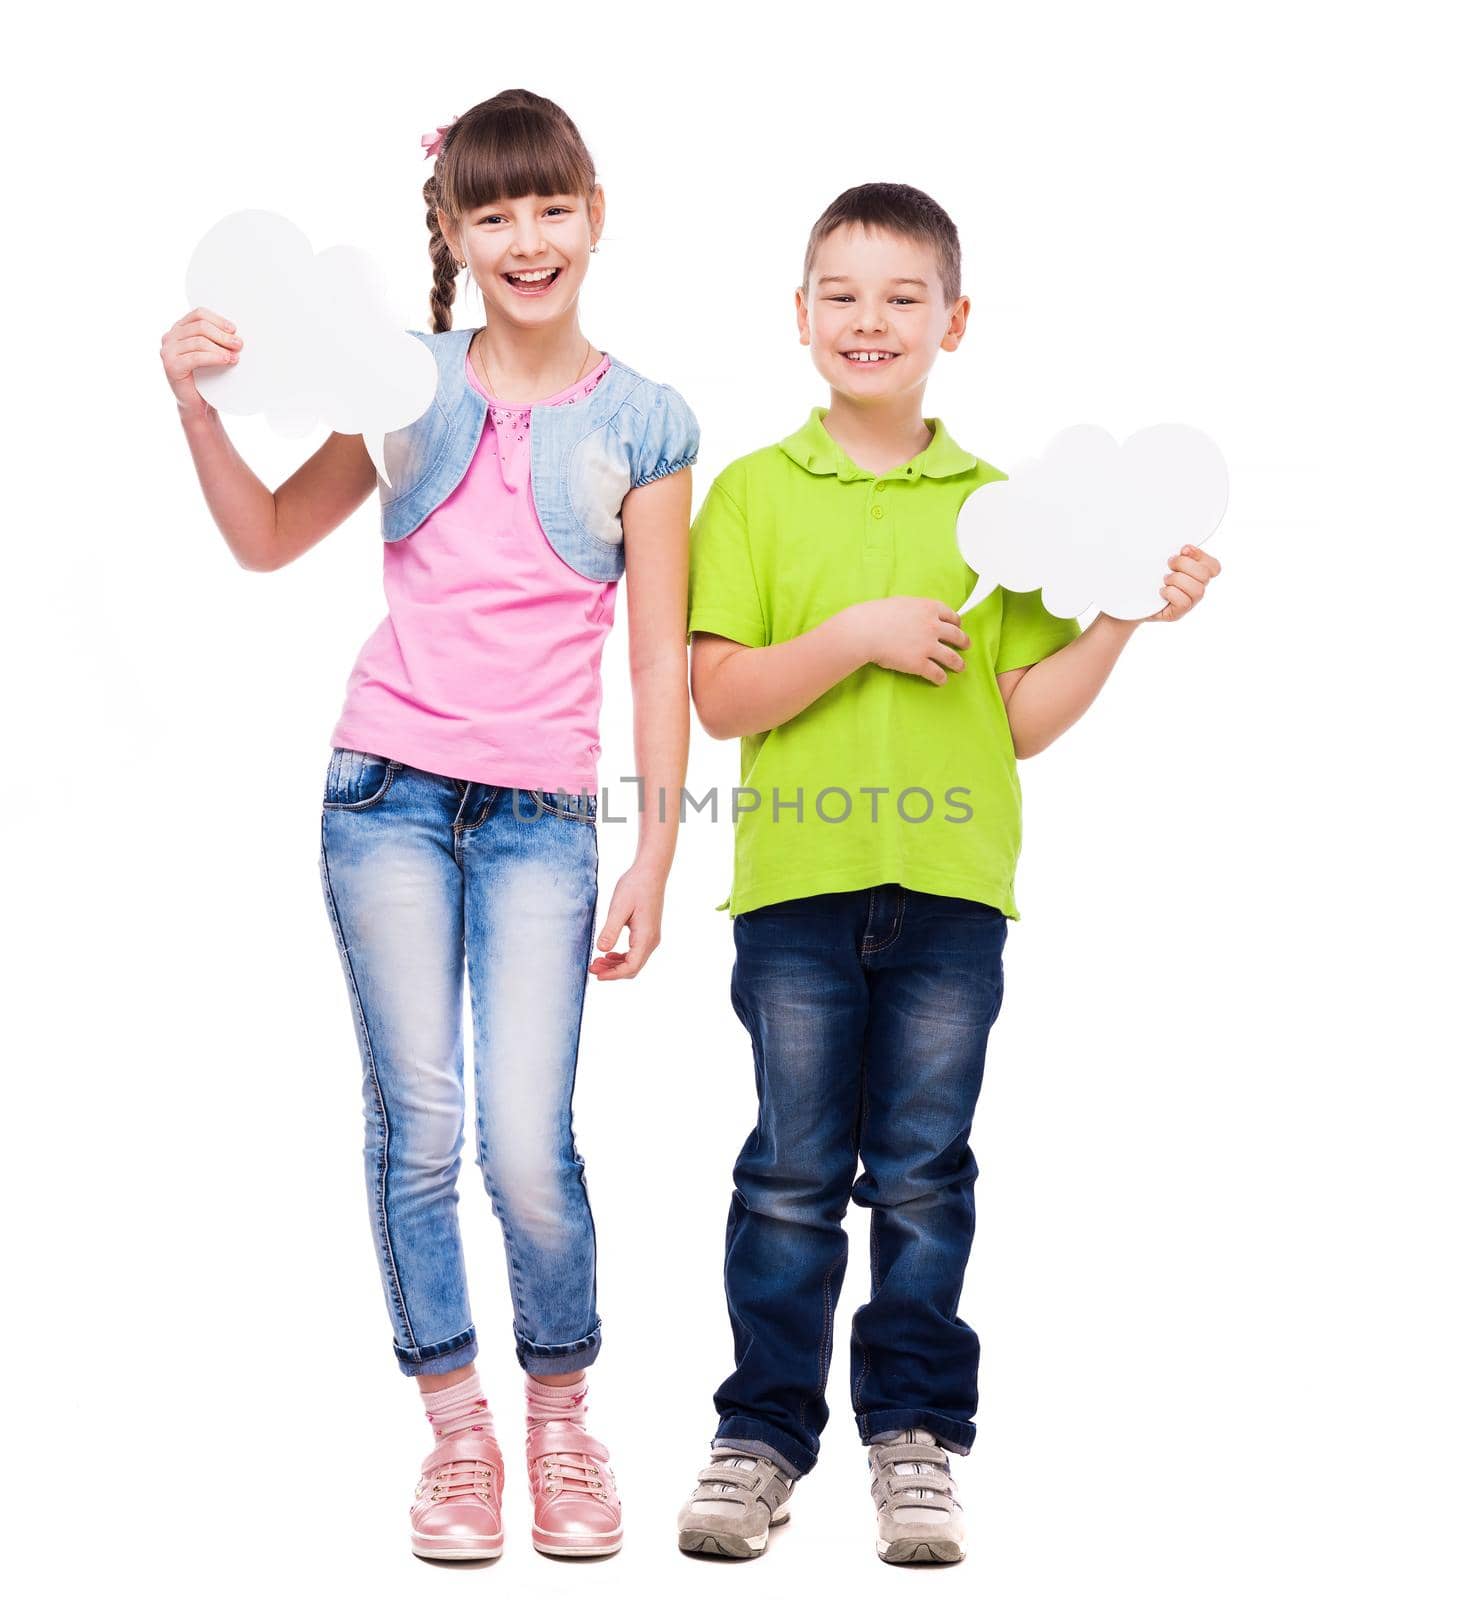 cute boy and girl holding scraps of paper in form of cloud isolated on white background